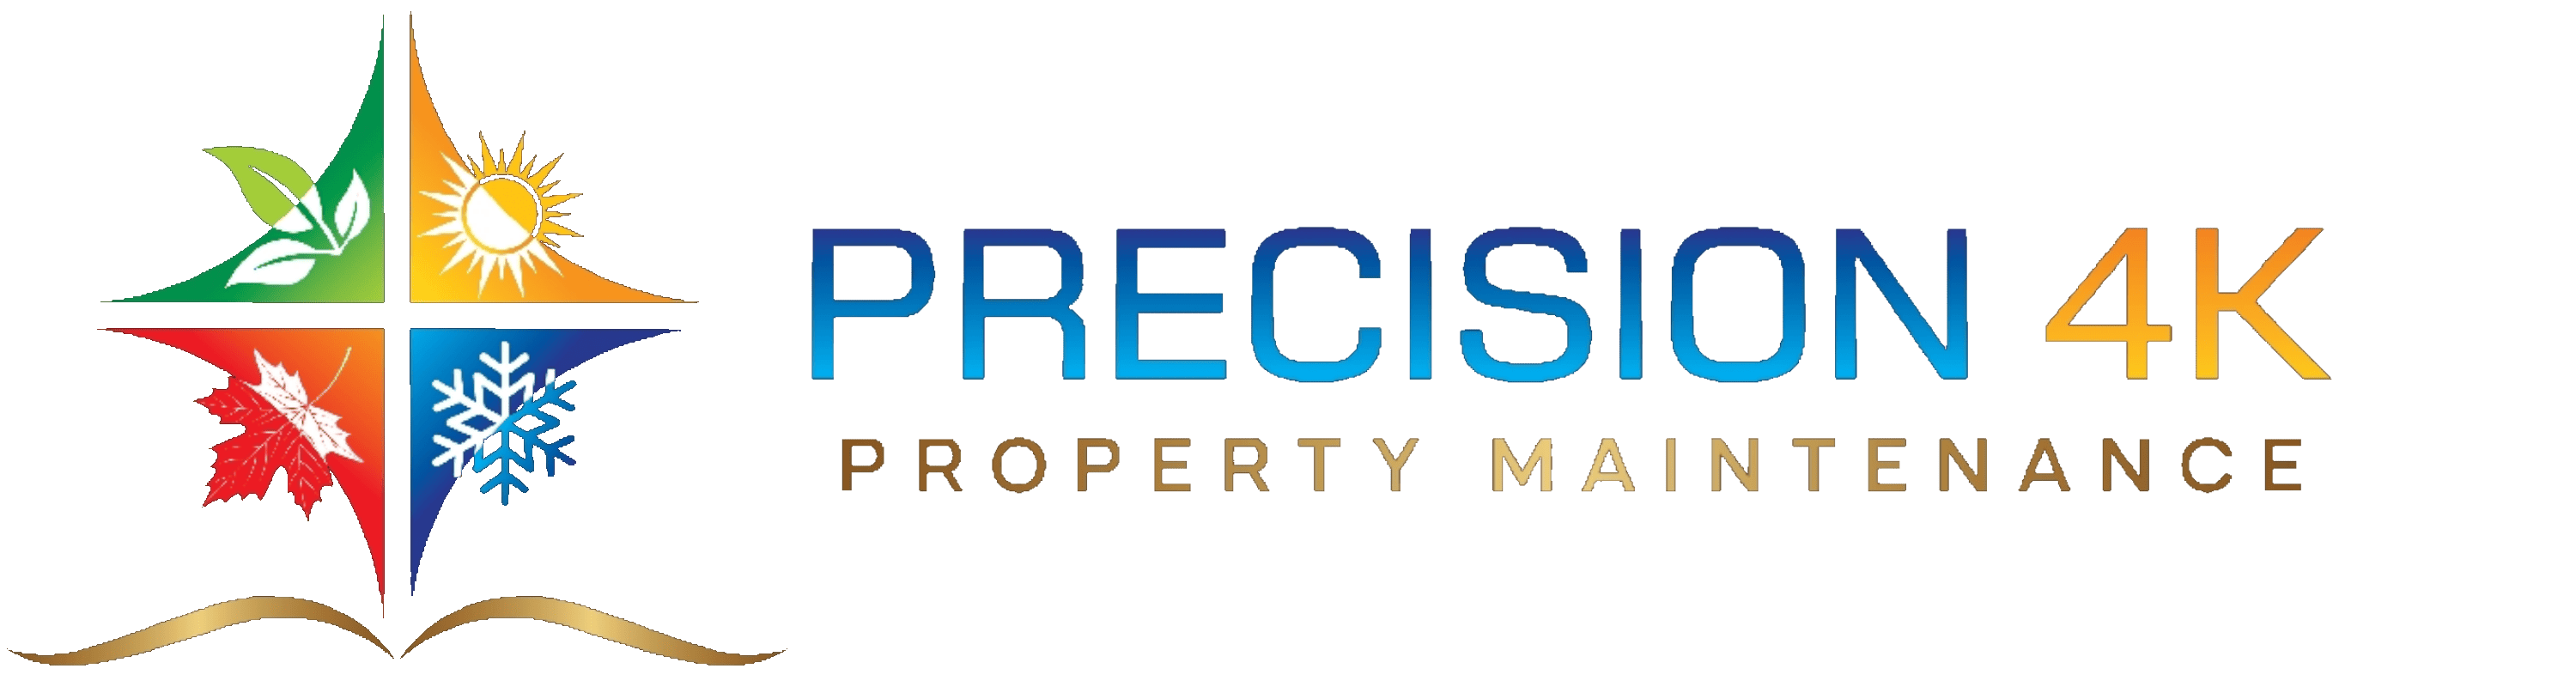 Precision 4k Property Maintenance Landscaping and Lawn Care Morden Canada Logo